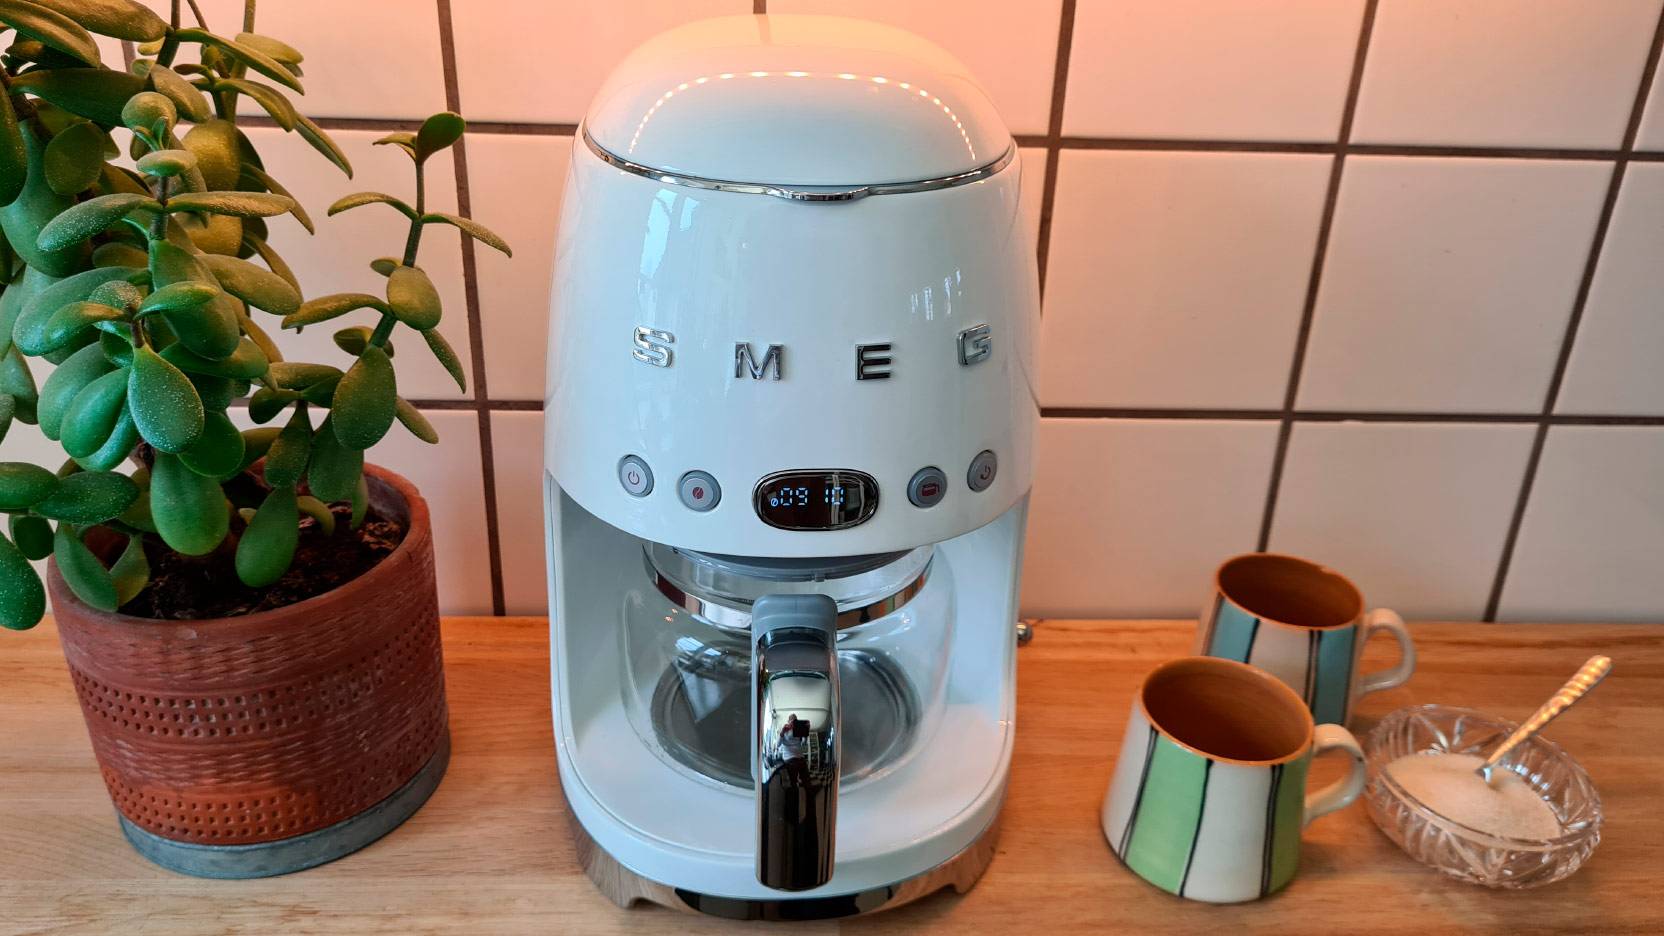 Imageof the Smeg DFC02 coffee machine waiting to be tested